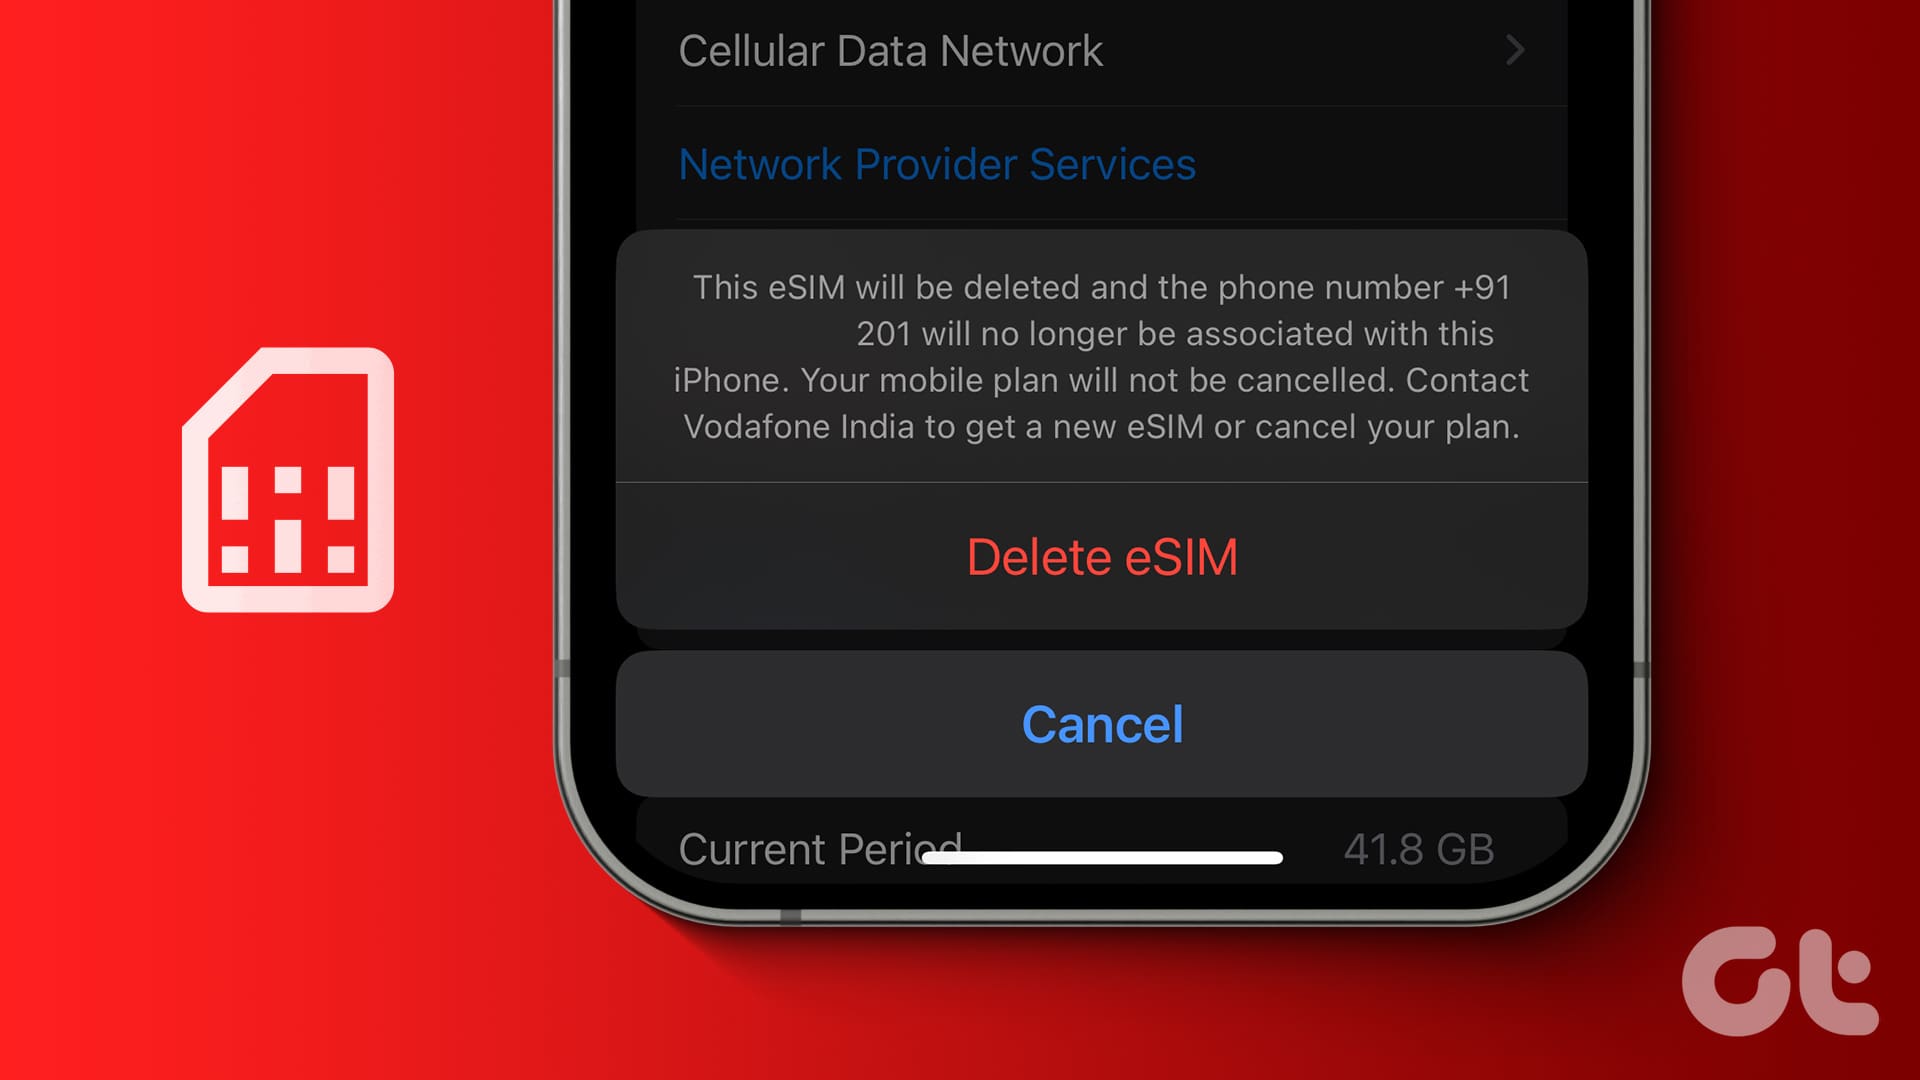 How to Delete an eSIM on iPhone and Android